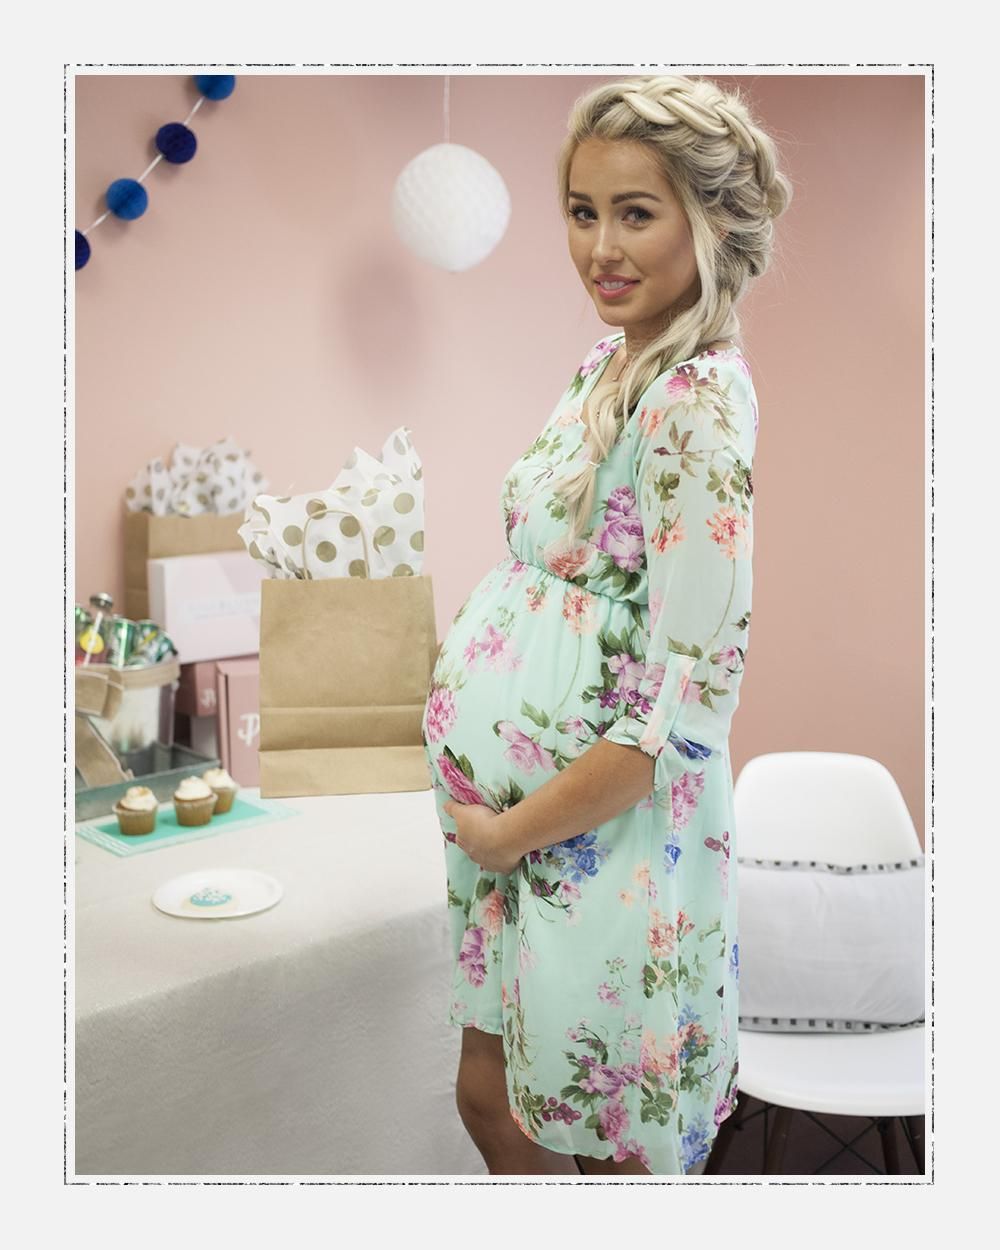 Full Size of Baby Shower:pink Maternity Dress Maternity Gowns For Photography Maternity Dresses For Baby Shower Mom And Dad Baby Shower Outfits Maternity Gown Style Maternity Stores Near Me Plus Size Maternity Clothes Cheap Maternity Jeans